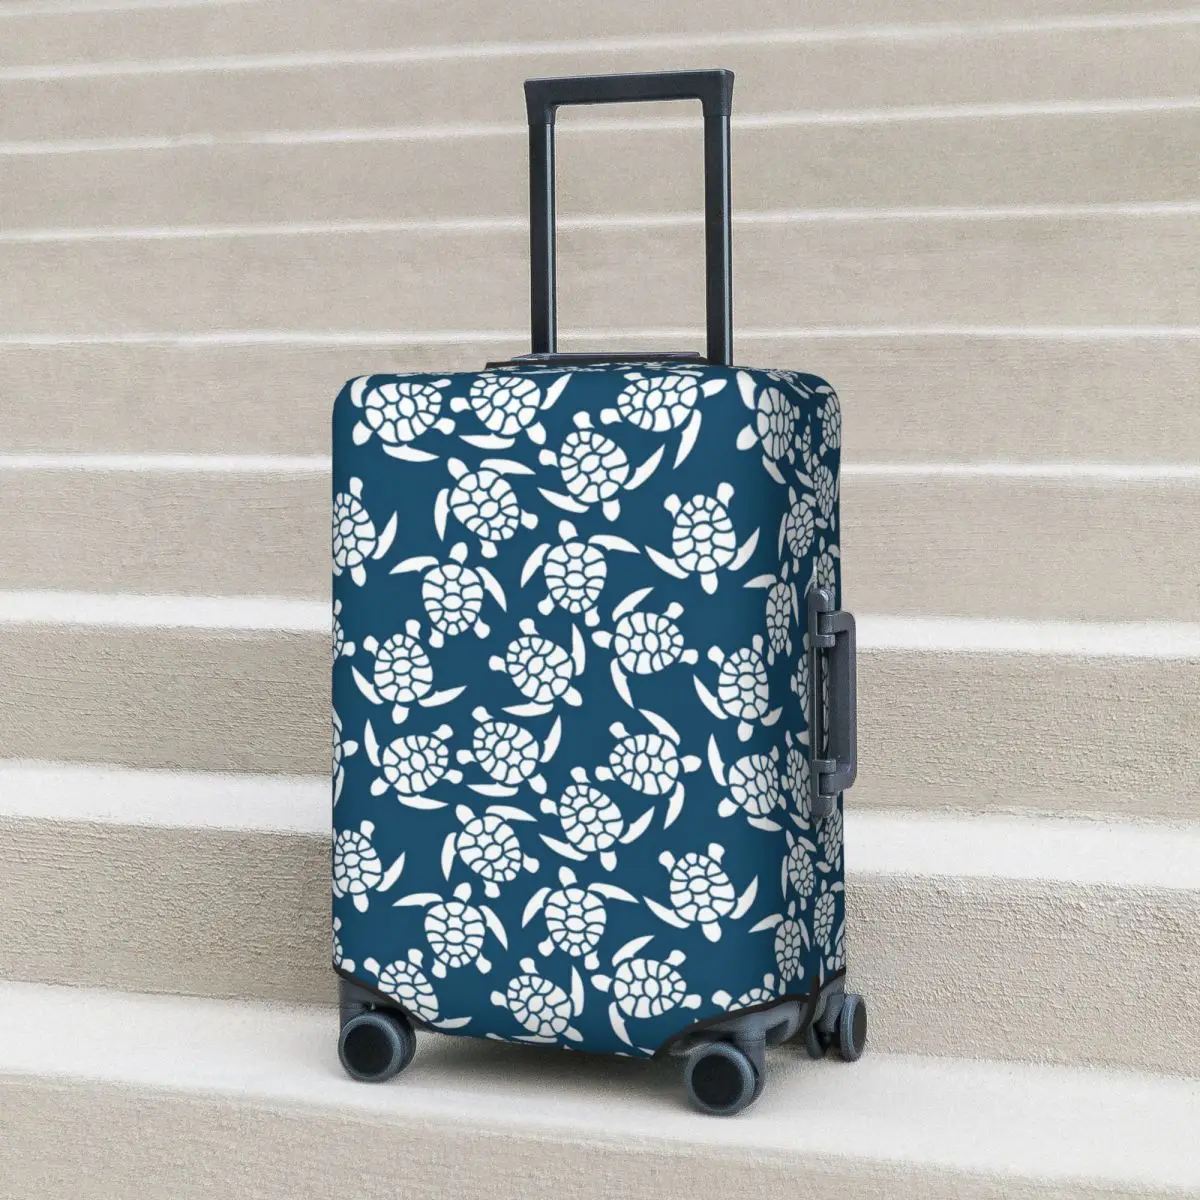 

Sea Turtle Suitcase Cover Holiday White and Blue Practical Luggage Supplies Cruise Trip Protector